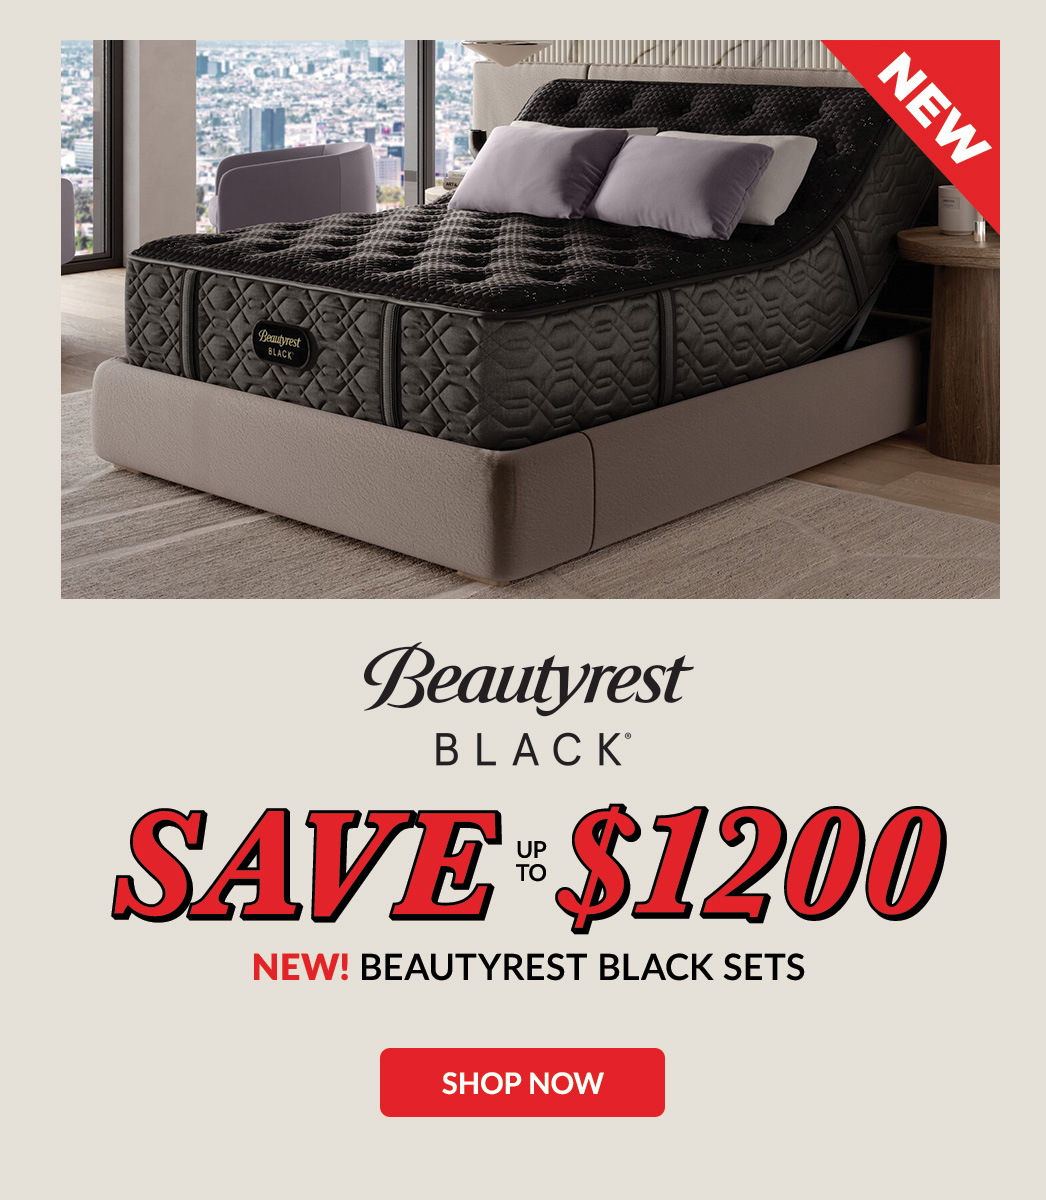 Save up to $1200 on New Beautyrest Black Sets